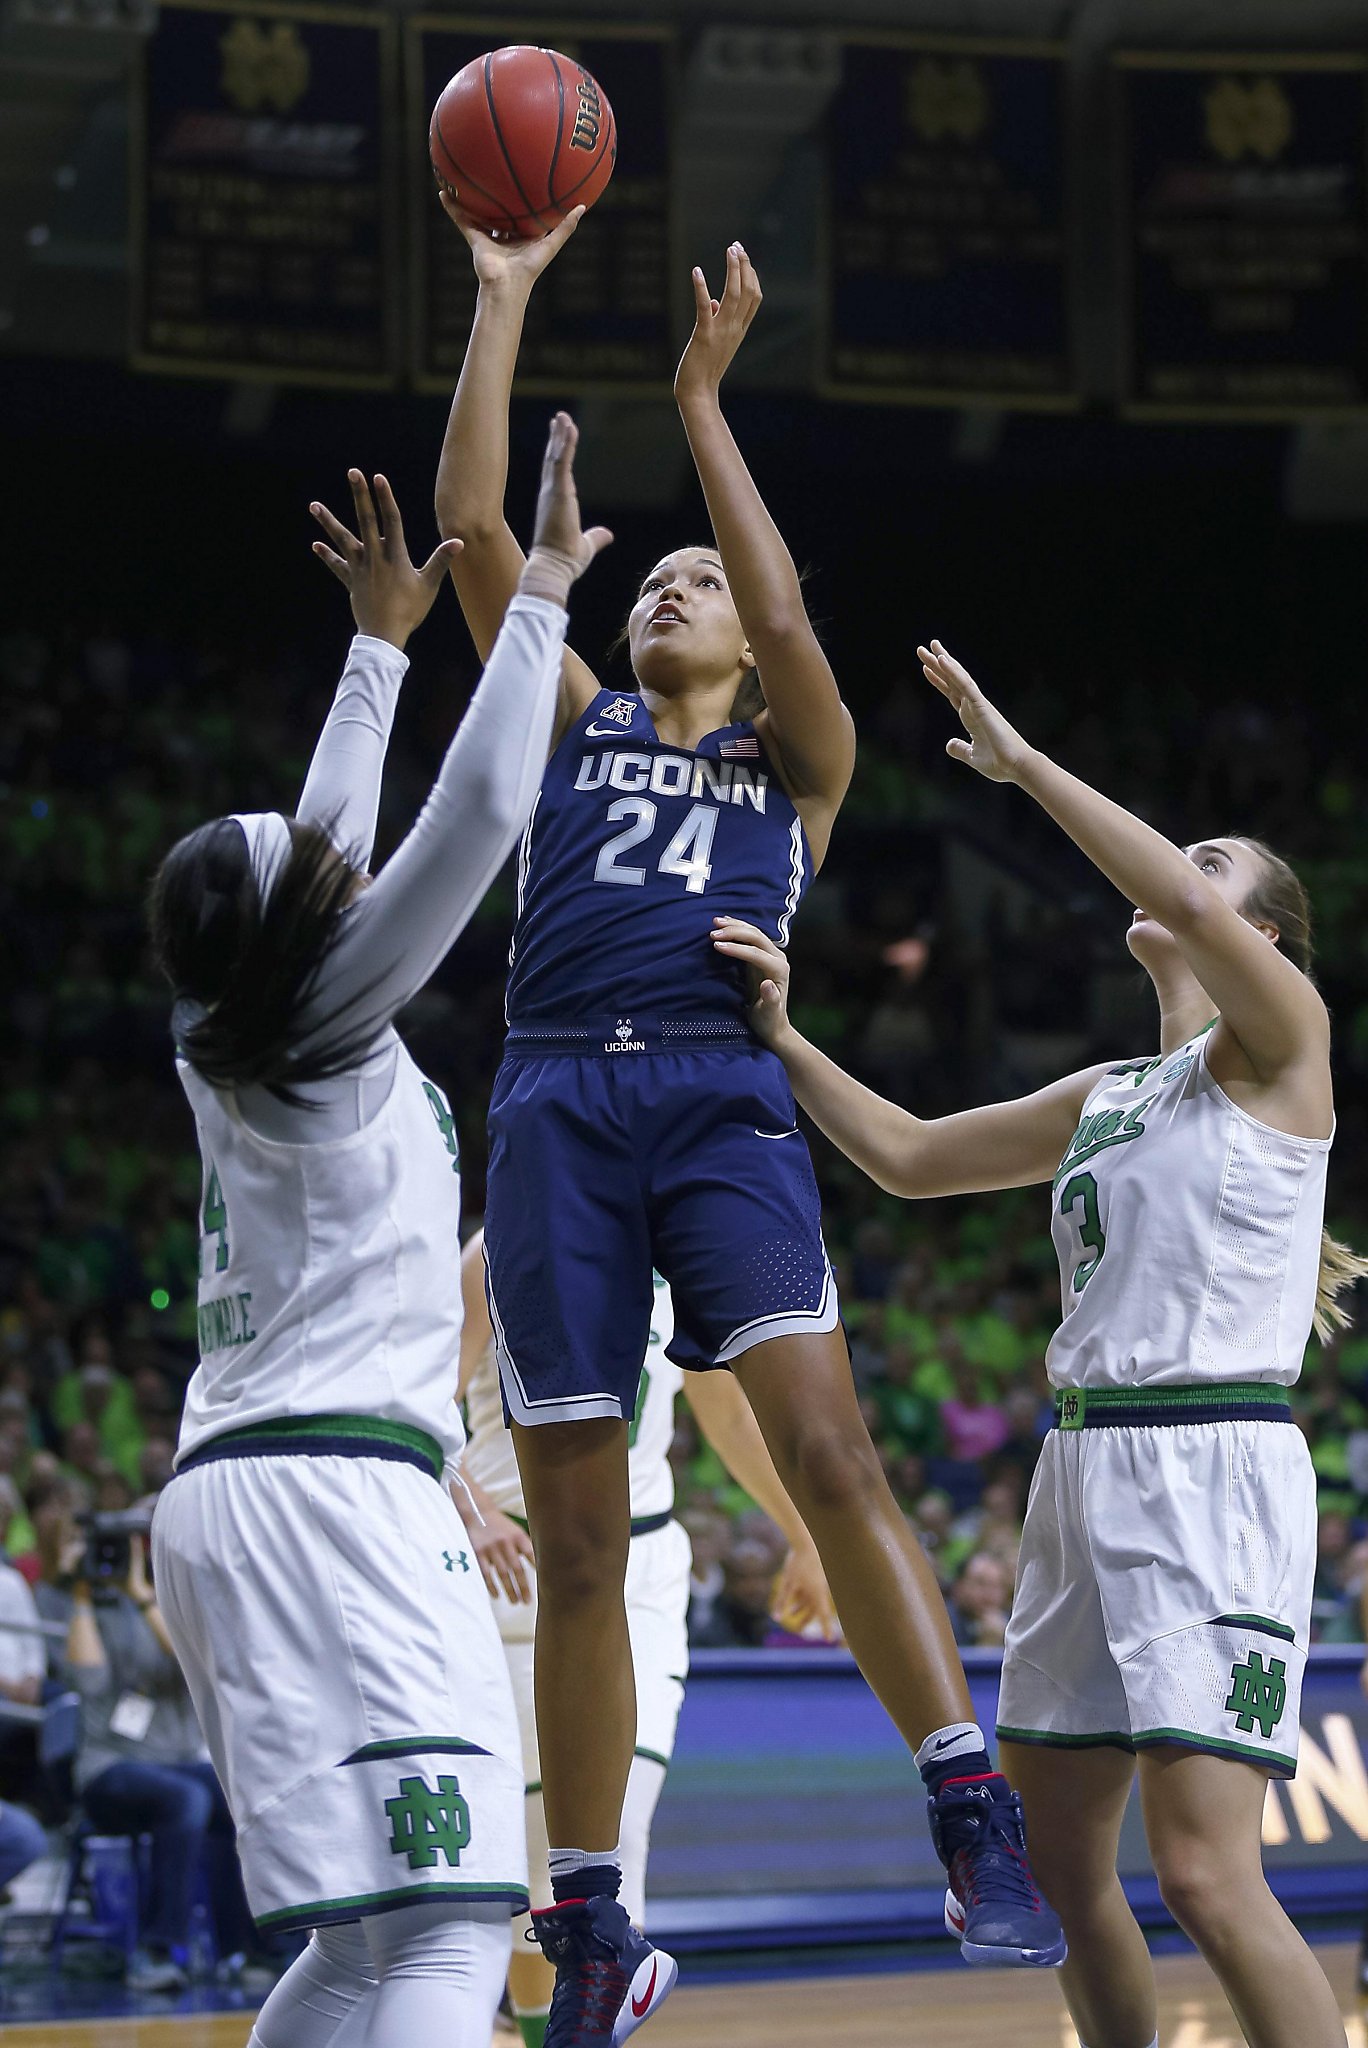 Uconn Defeats Notre Dame In Matchup Of Top Womens Teams 8256